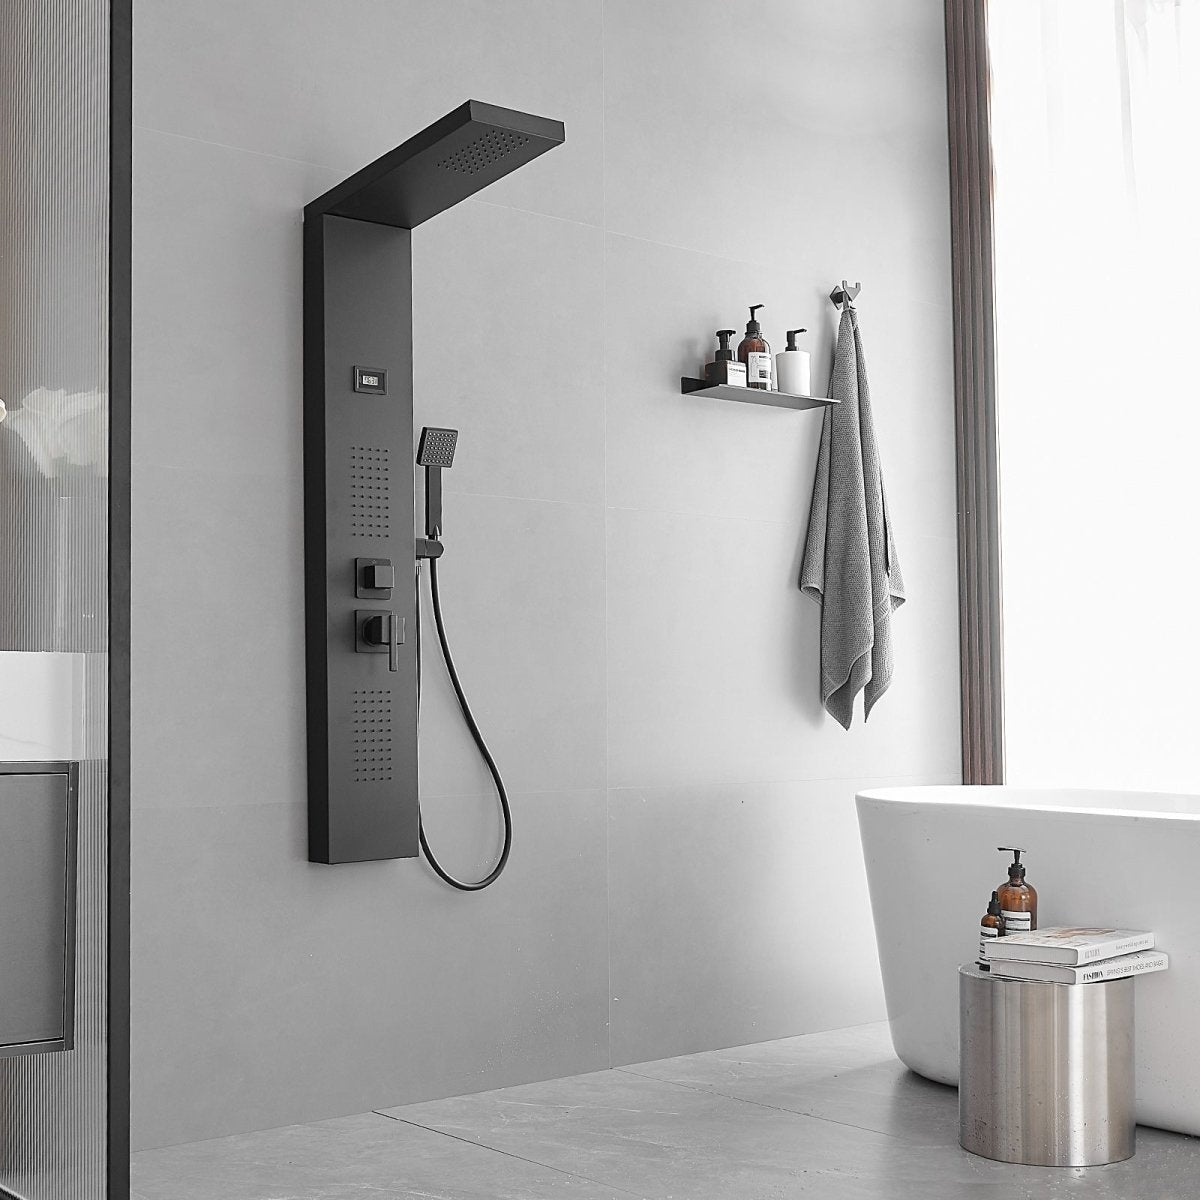 2-Jet Rainfall Shower Panel System in Stainless Steel Black - buyfaucet.com